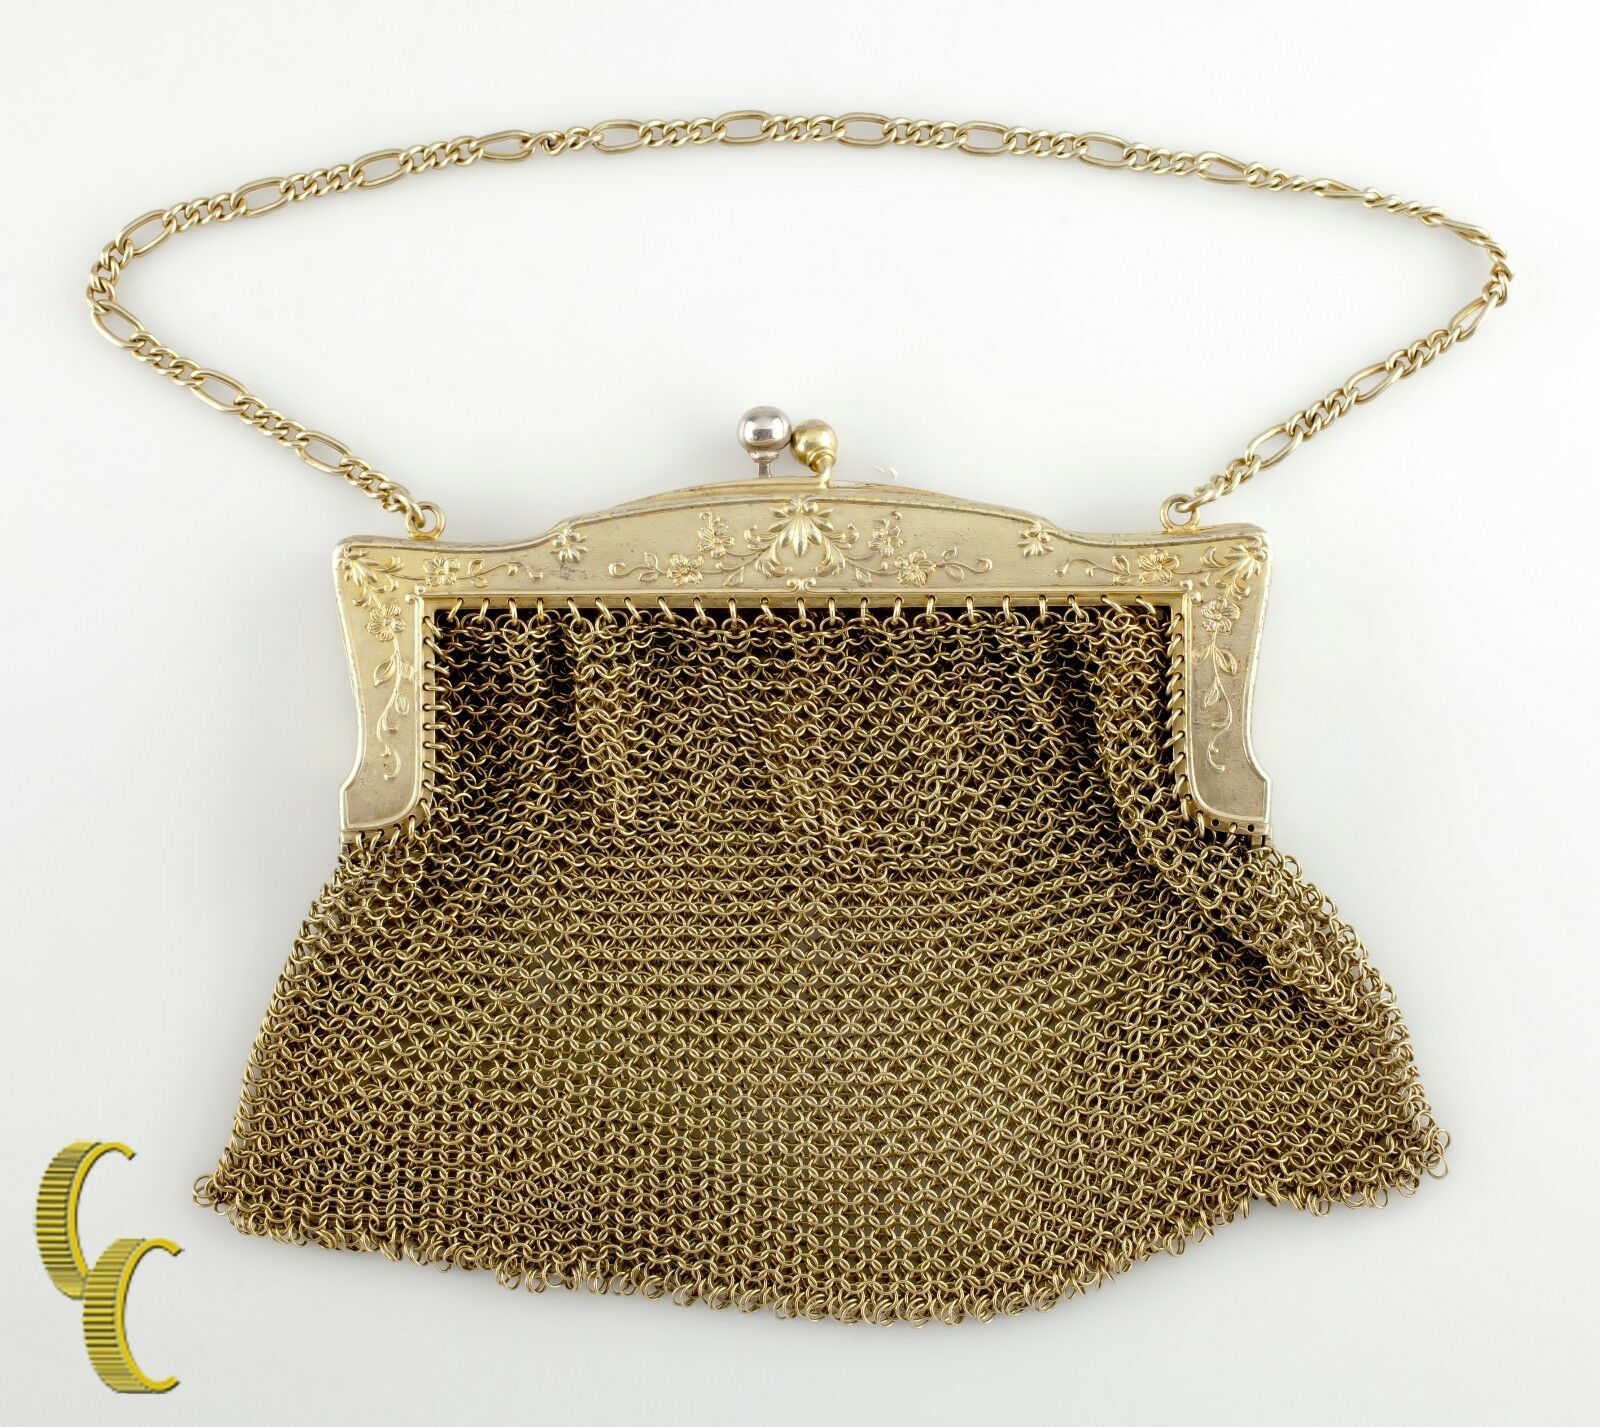 Vintage Gold-Tone Sterling Silver Mesh Chain Mail Engraved Clutch